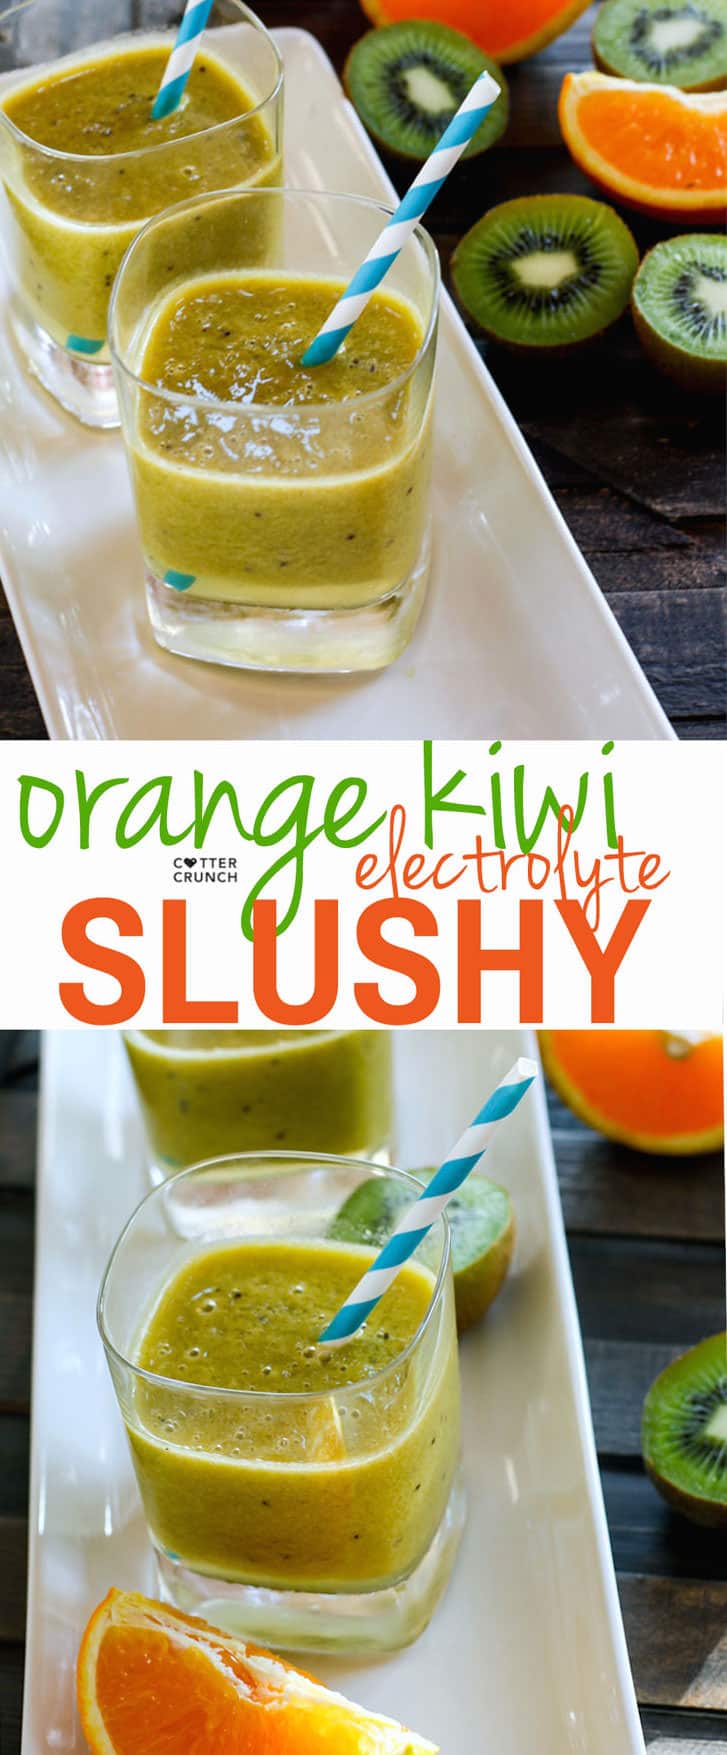 Homemade Orange Kiwi Citrus Electrolyte Slushy! The perfect way to rehydrate and stay healthy during those hot summer months or with strenuous activity. A delicious drink packed with Vitamin C, Minerals, and Natural Sugars! This slushy combines the super powers over Orange, Kiwi, honey, Lime Juice, and sea salt to keep the body well tuned! Plus it's great for kids!